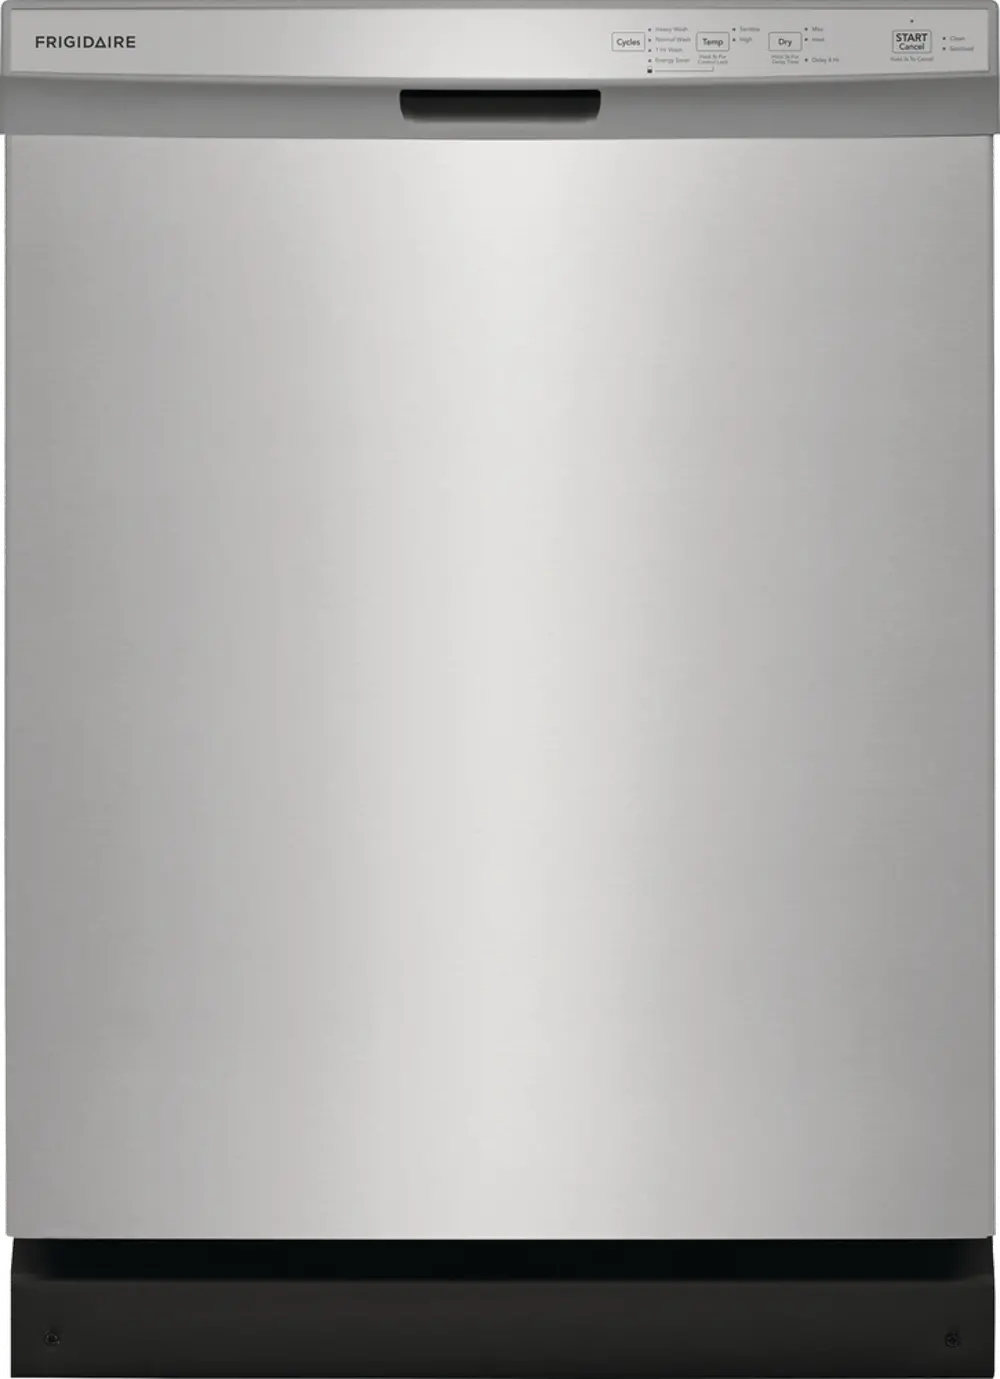 FDPC4314AS Frigidaire Front Control Dishwasher - Stainless Steel-1